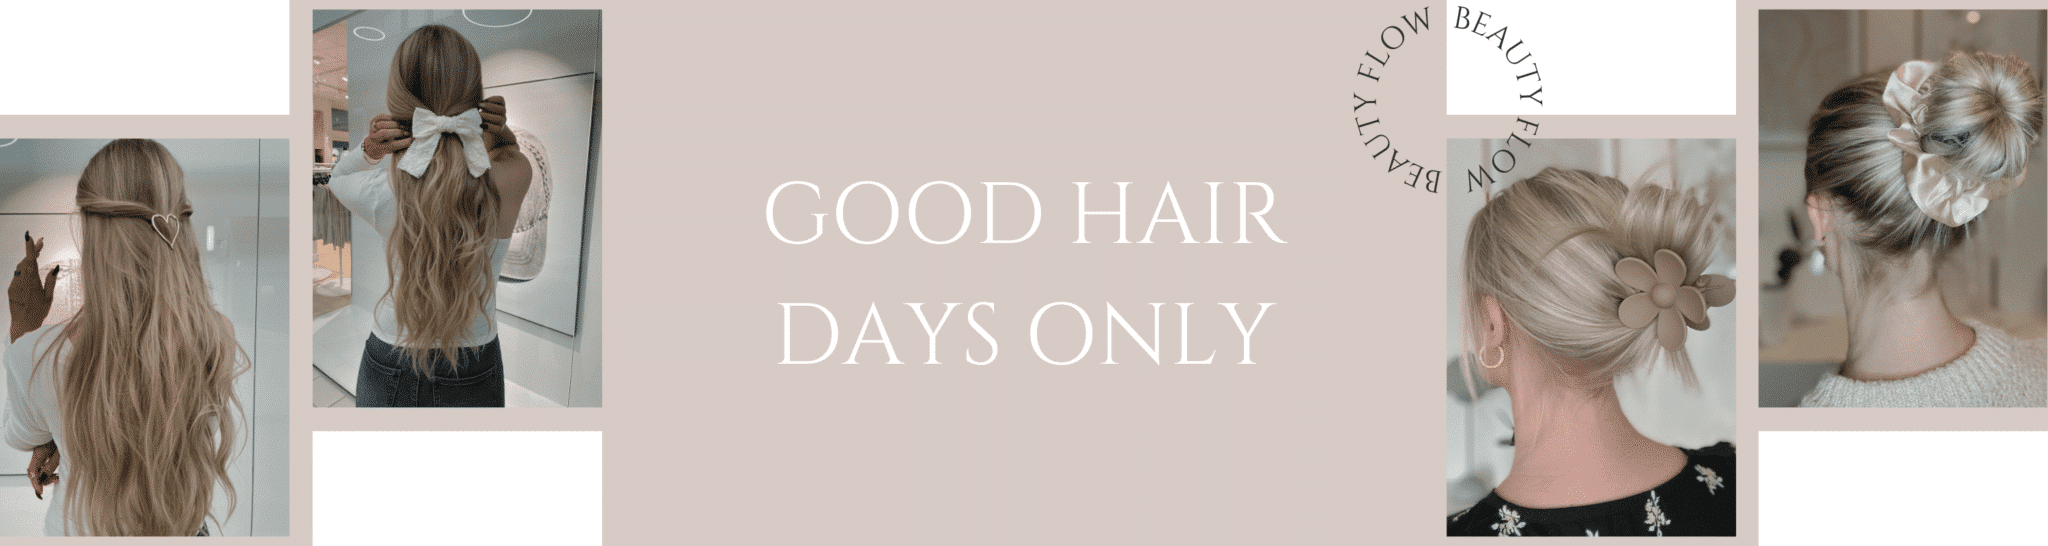 GOOD HAIR DAYS ONLY WITH BEAUTY FLOW